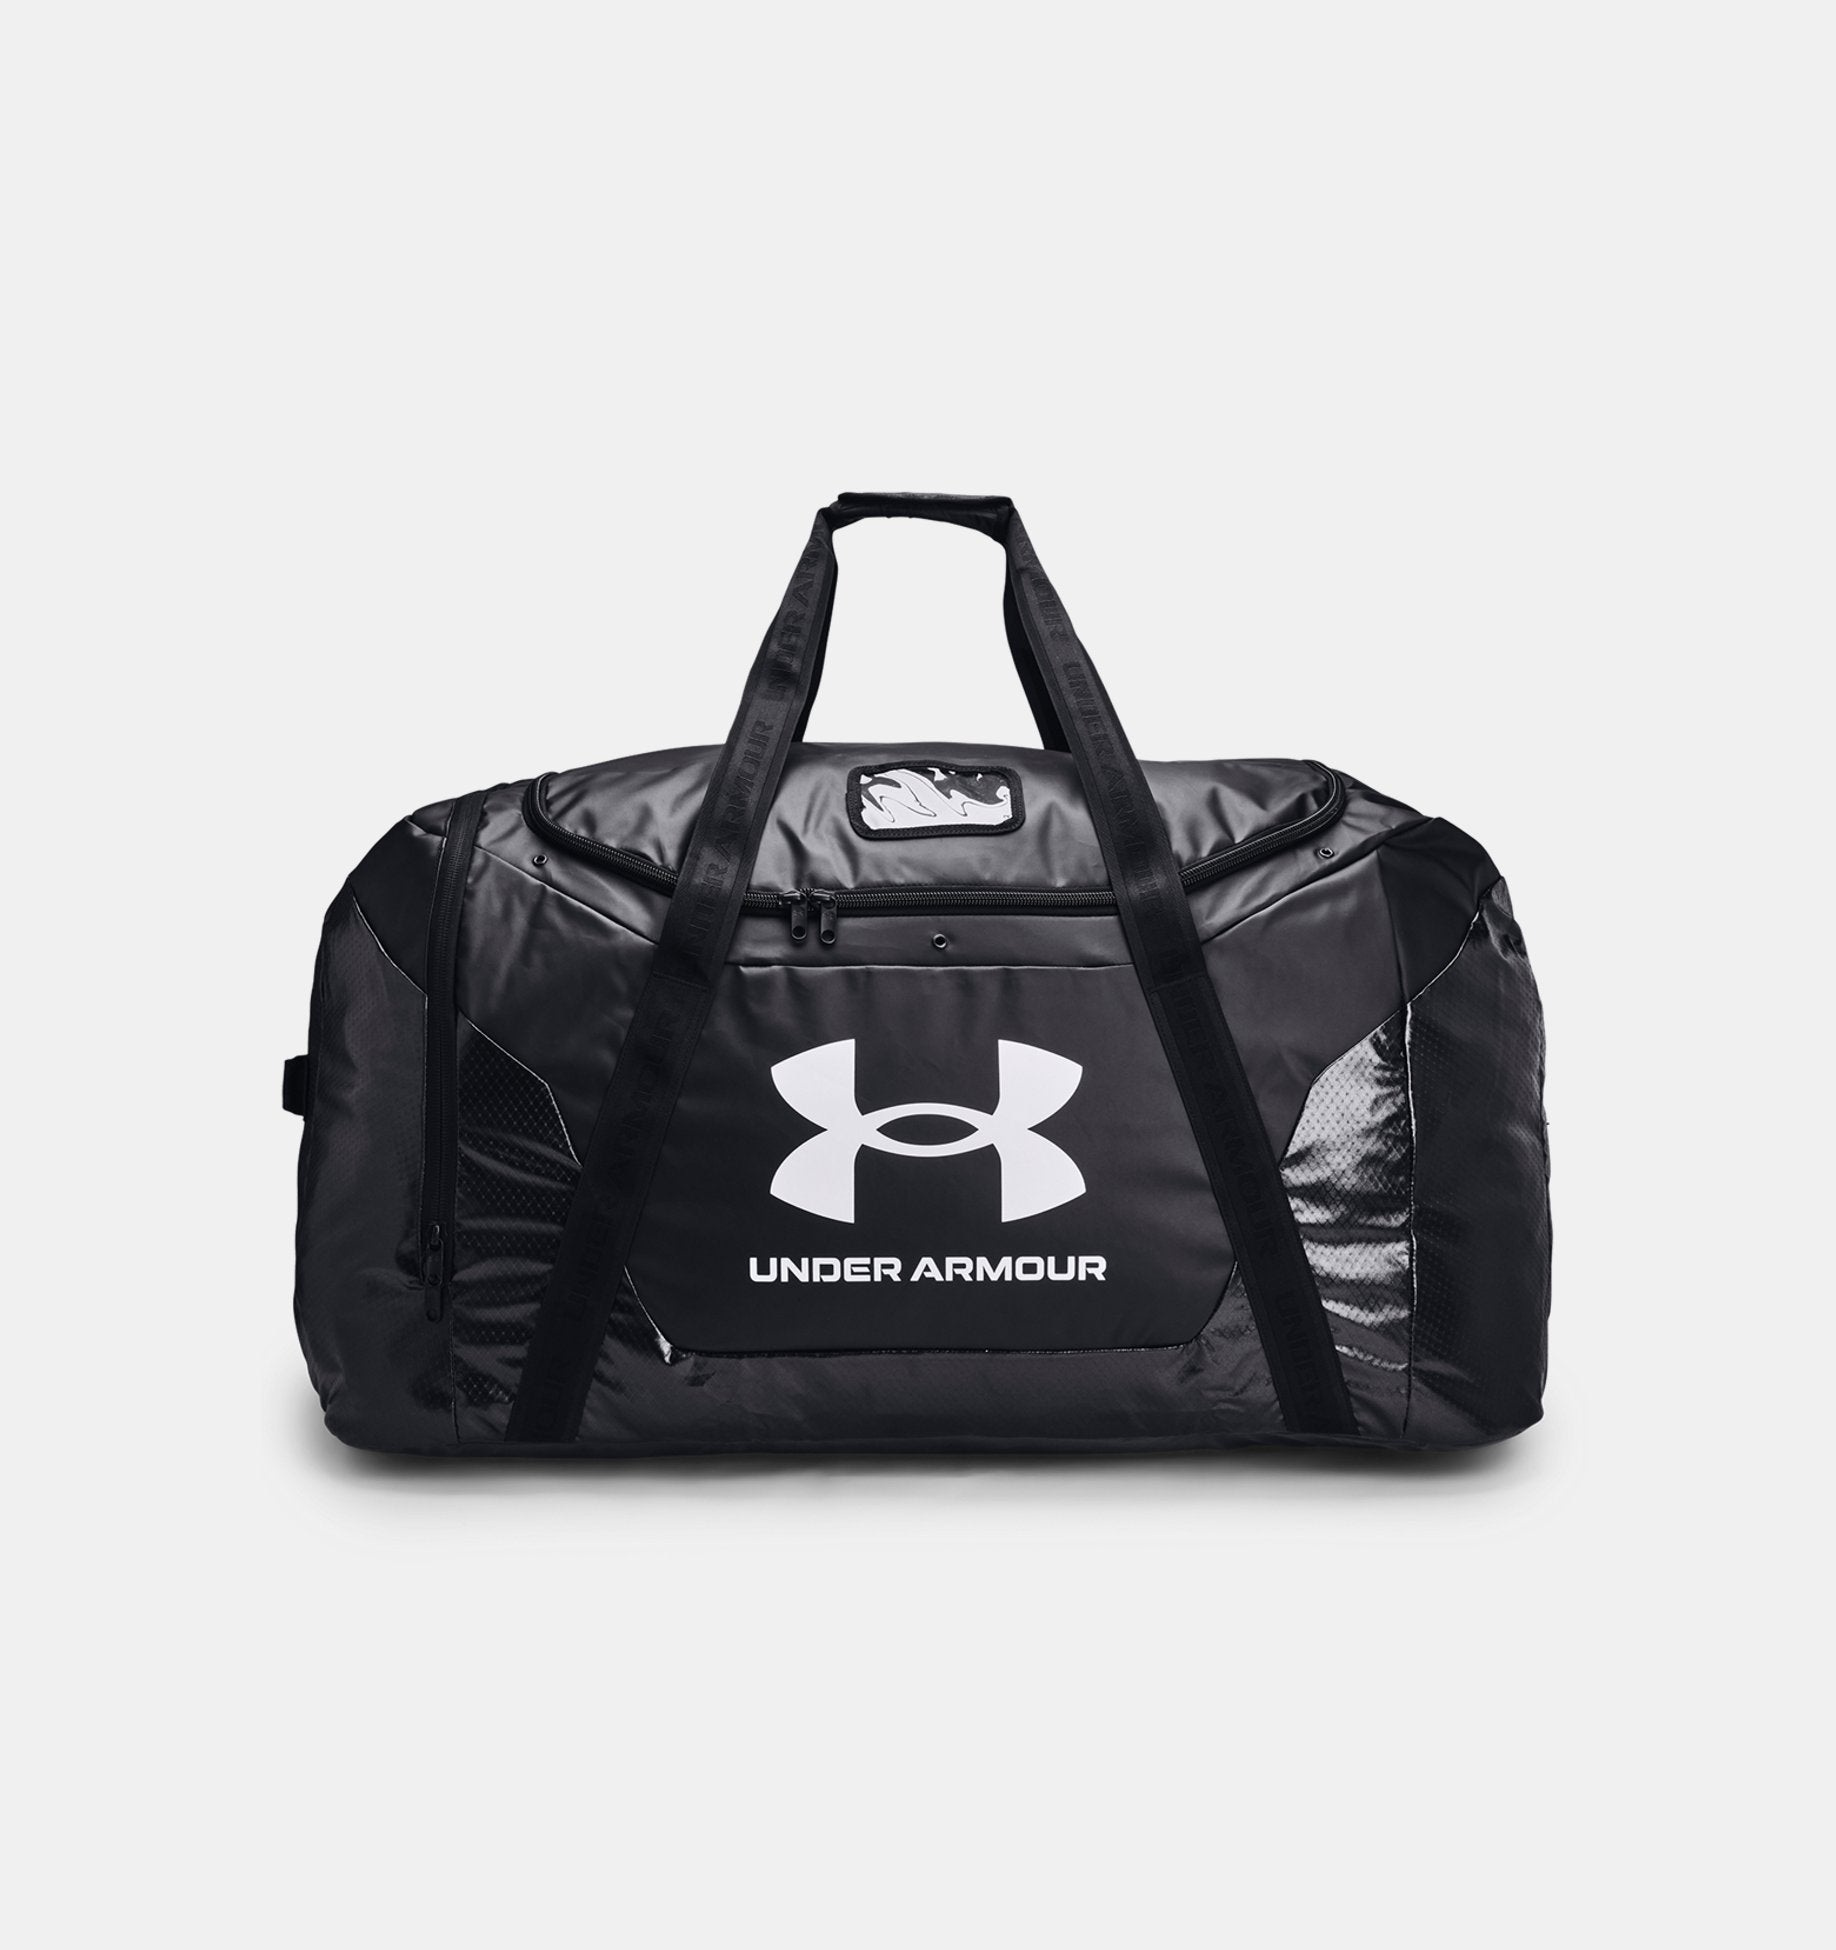 Under Armour Hockey Equipment Bag-Under Armour-Sports Replay - Sports Excellence